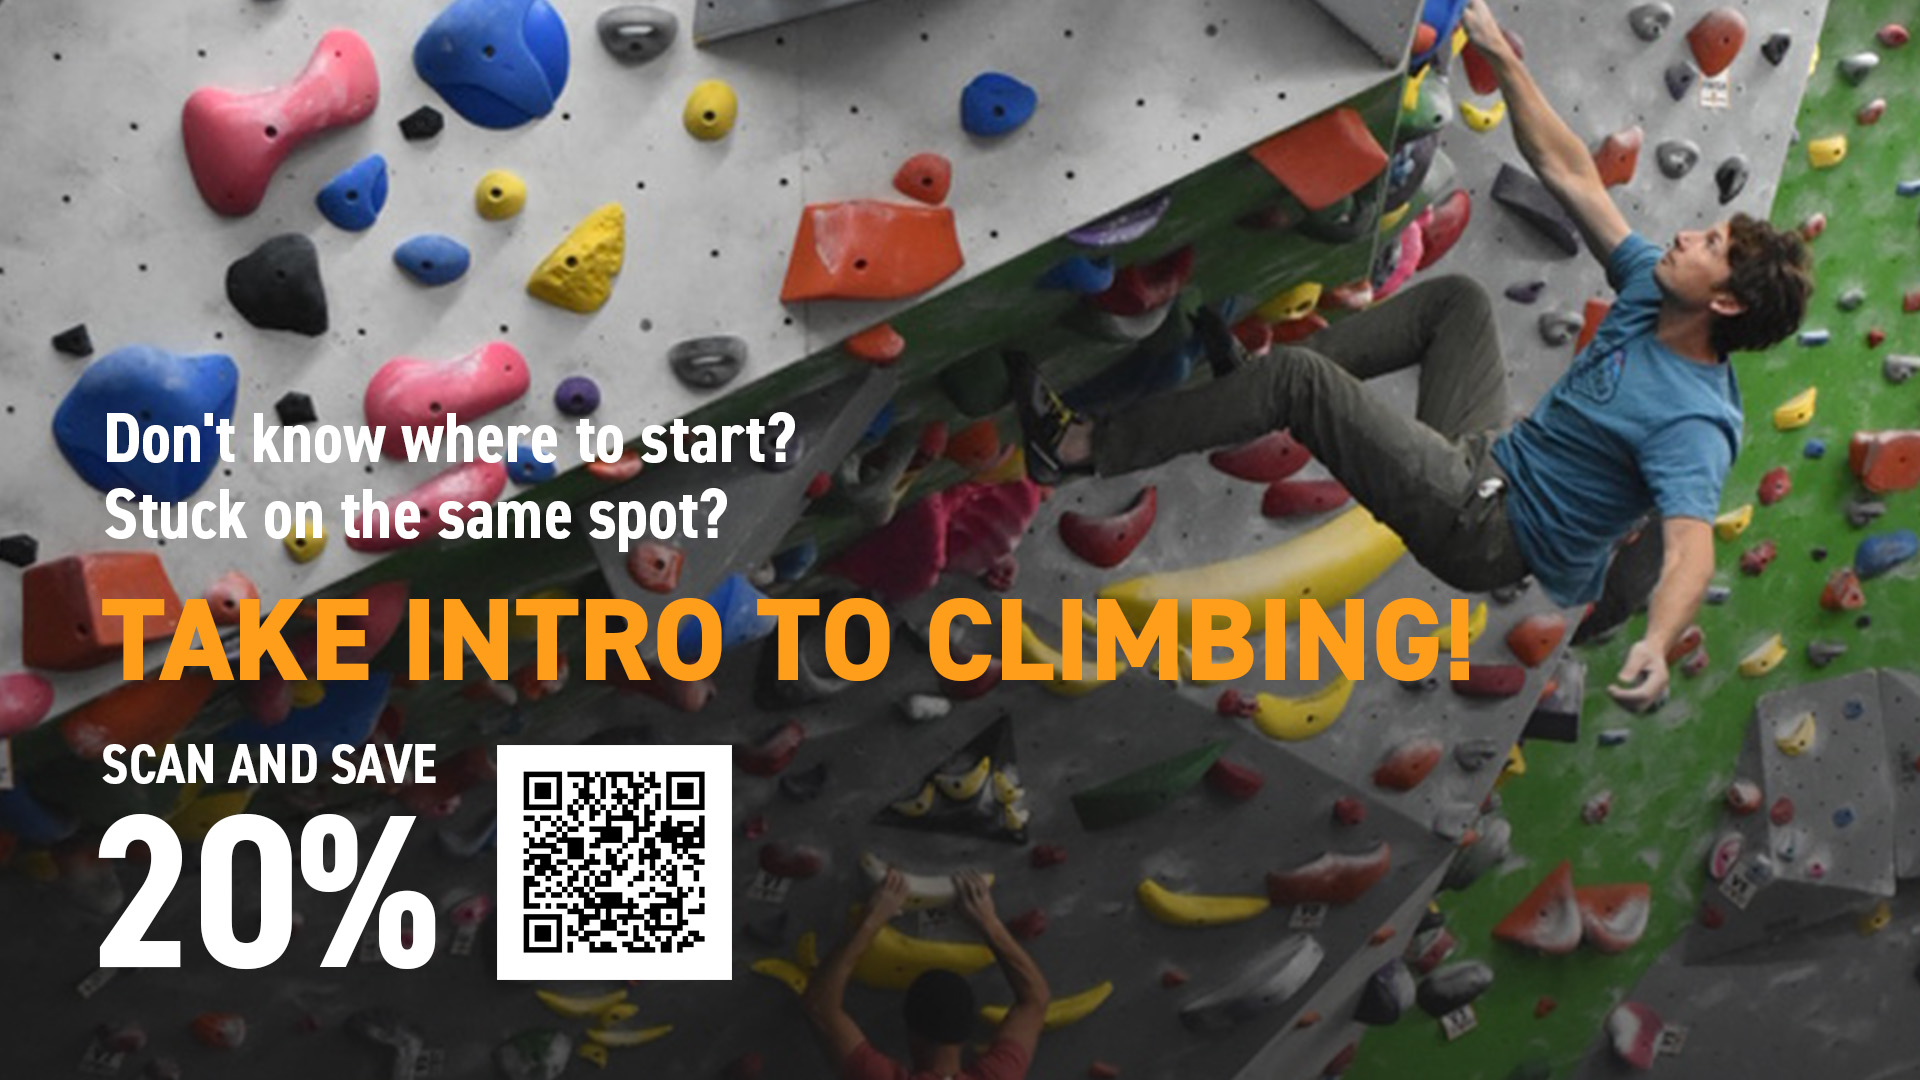 Don't know where to start? Stuck in the same spot? Take Intro to Climbing! Now 20% off! A climber scales a colorful bouldering wall.